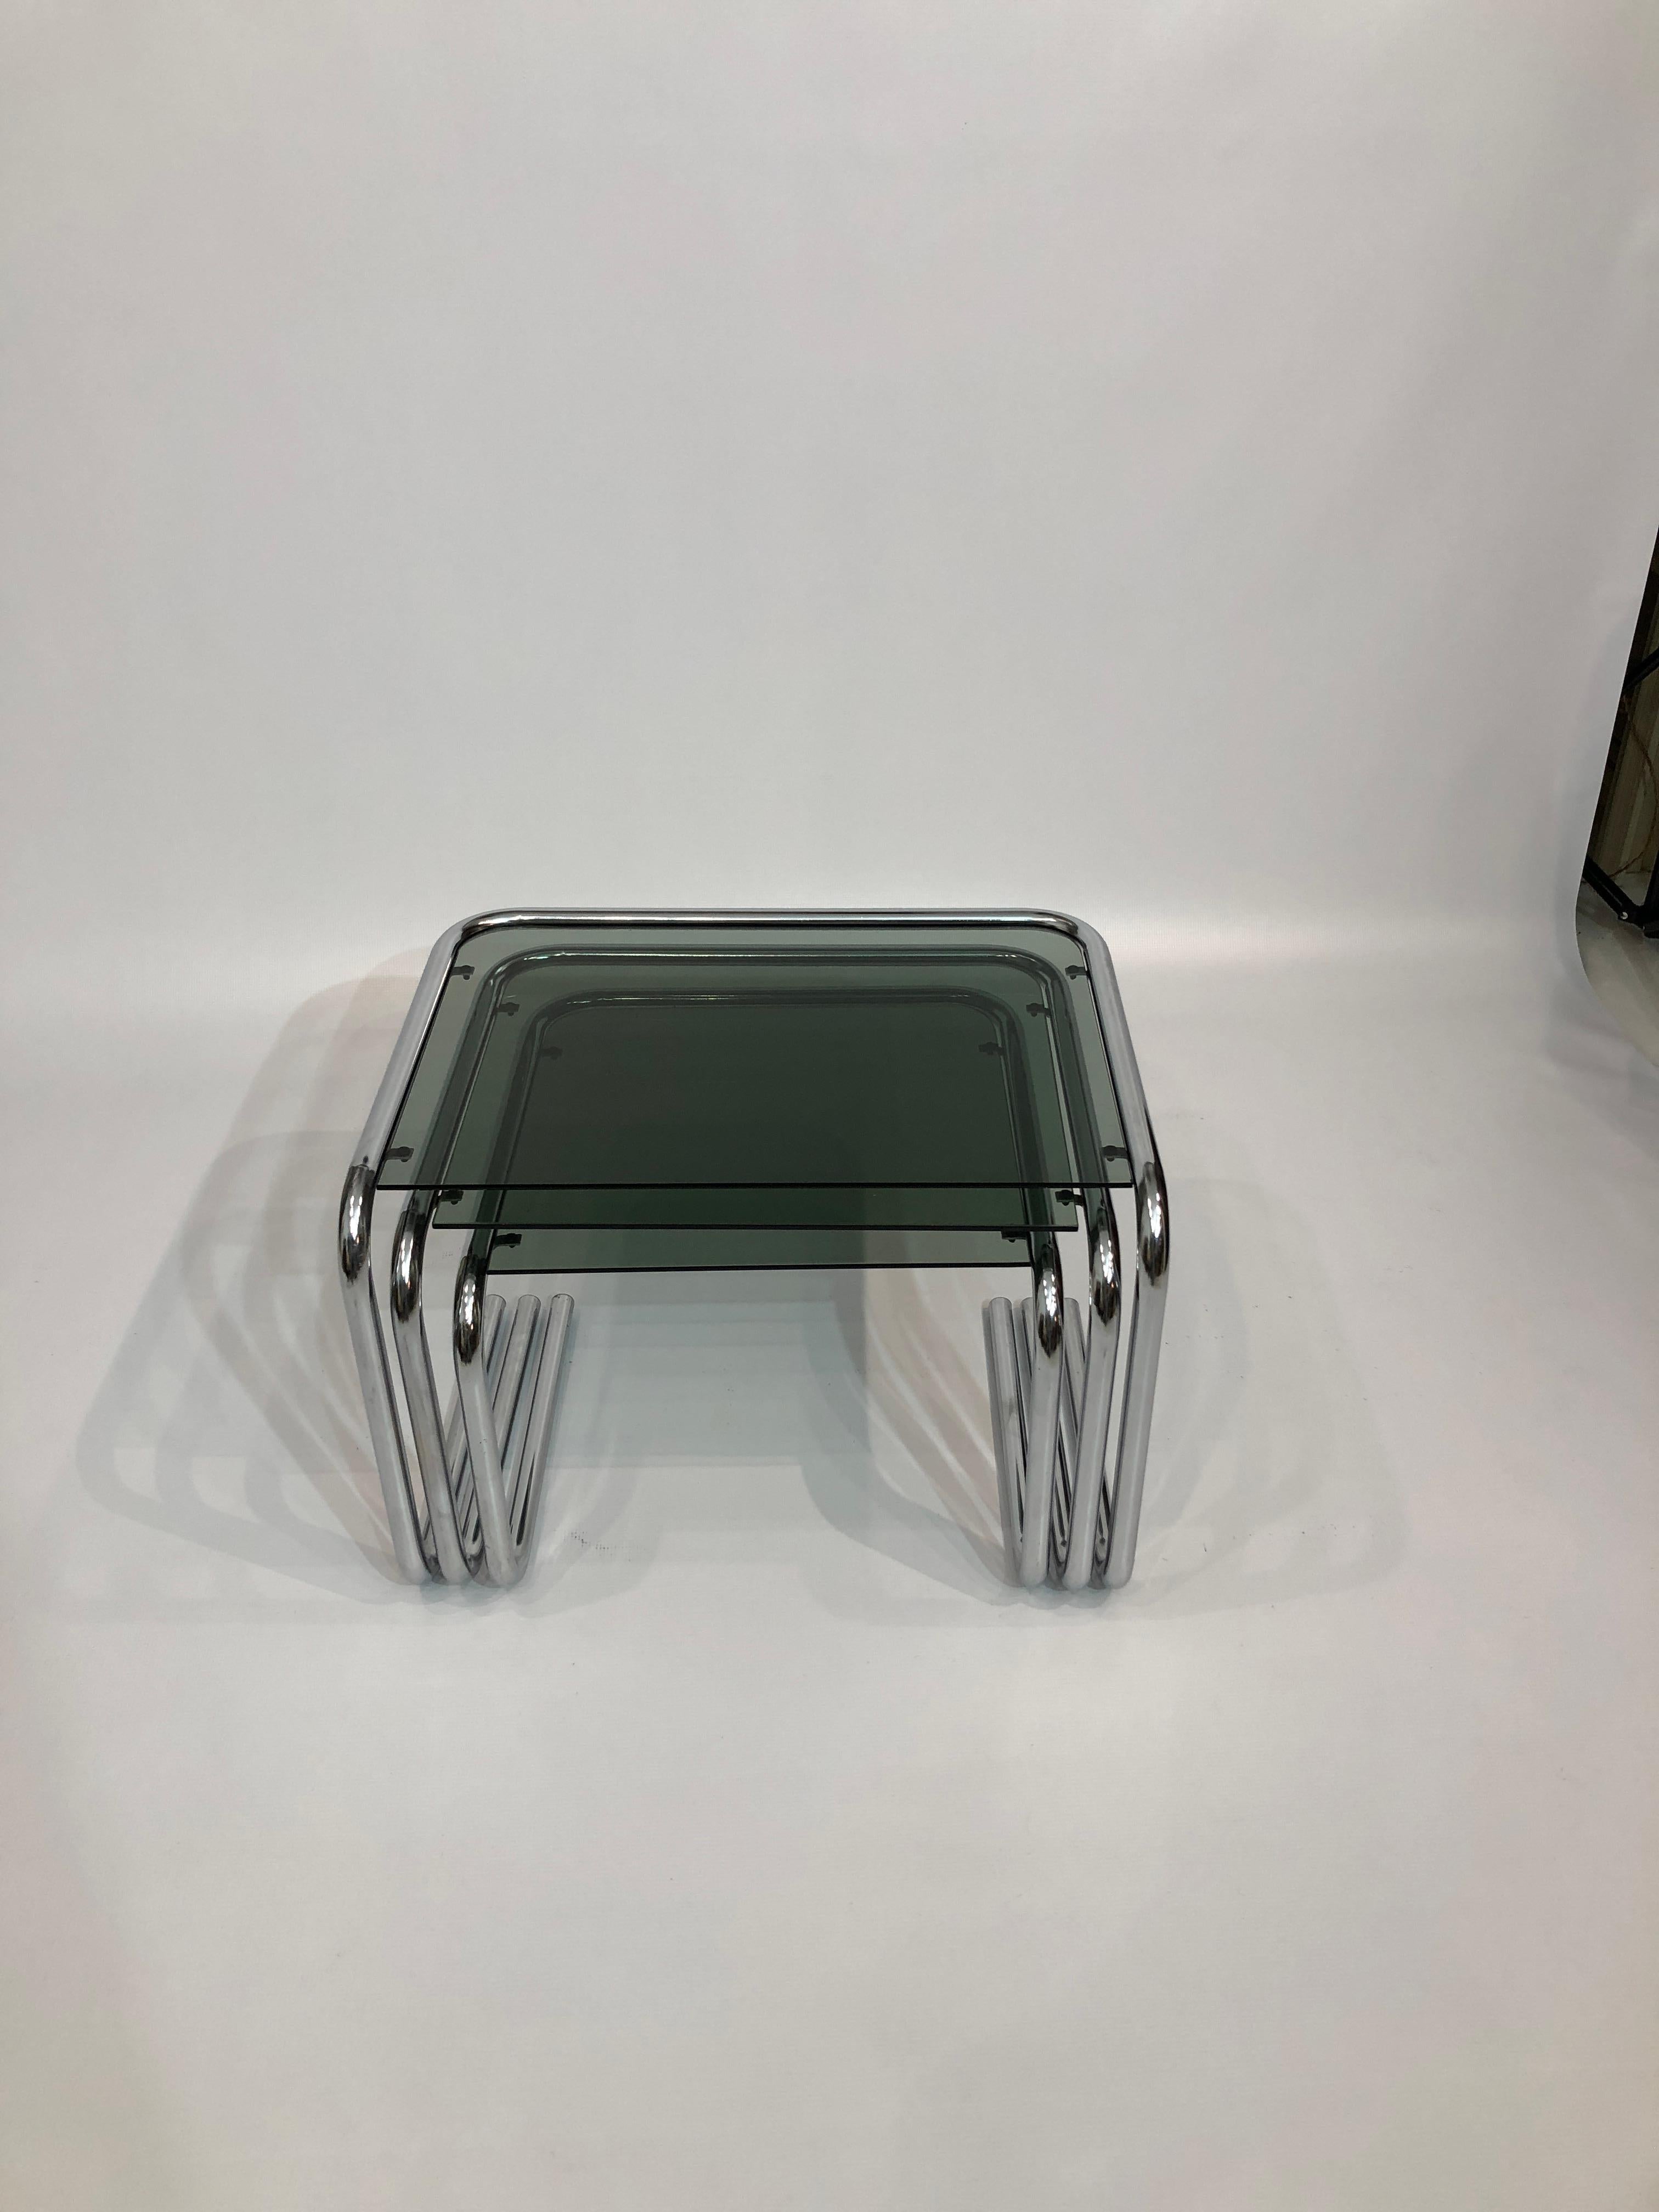 Post-Modern Postmodern Nesting Side Tables 1970s Chrome Cantilever Pieff Style Smoked Glass